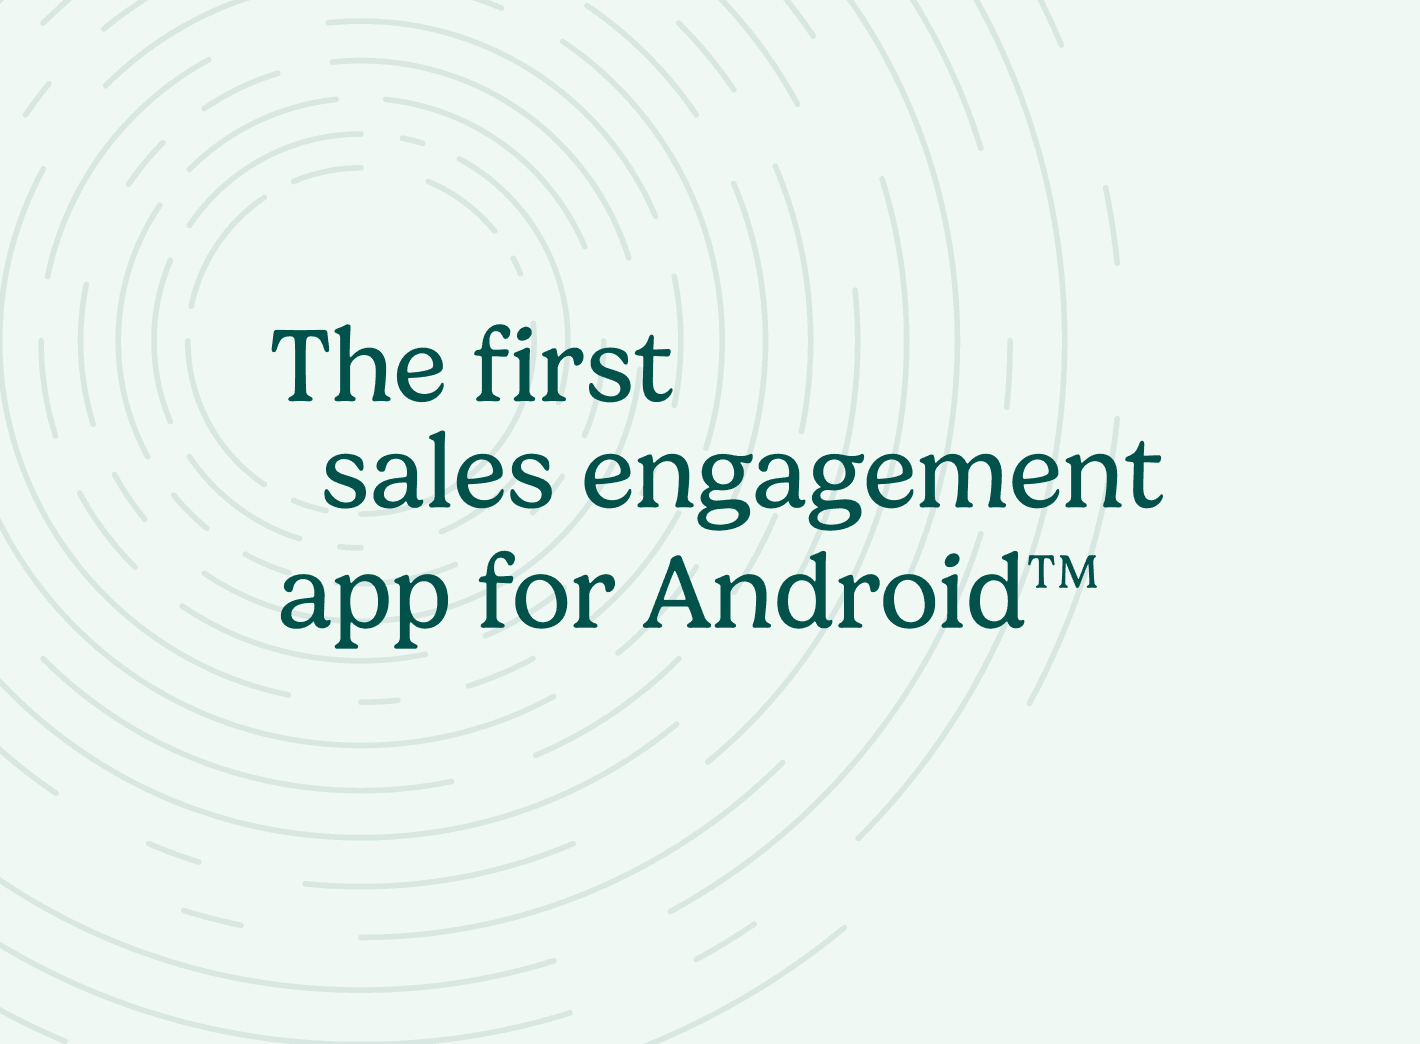 "The first sales engagement app for Android"